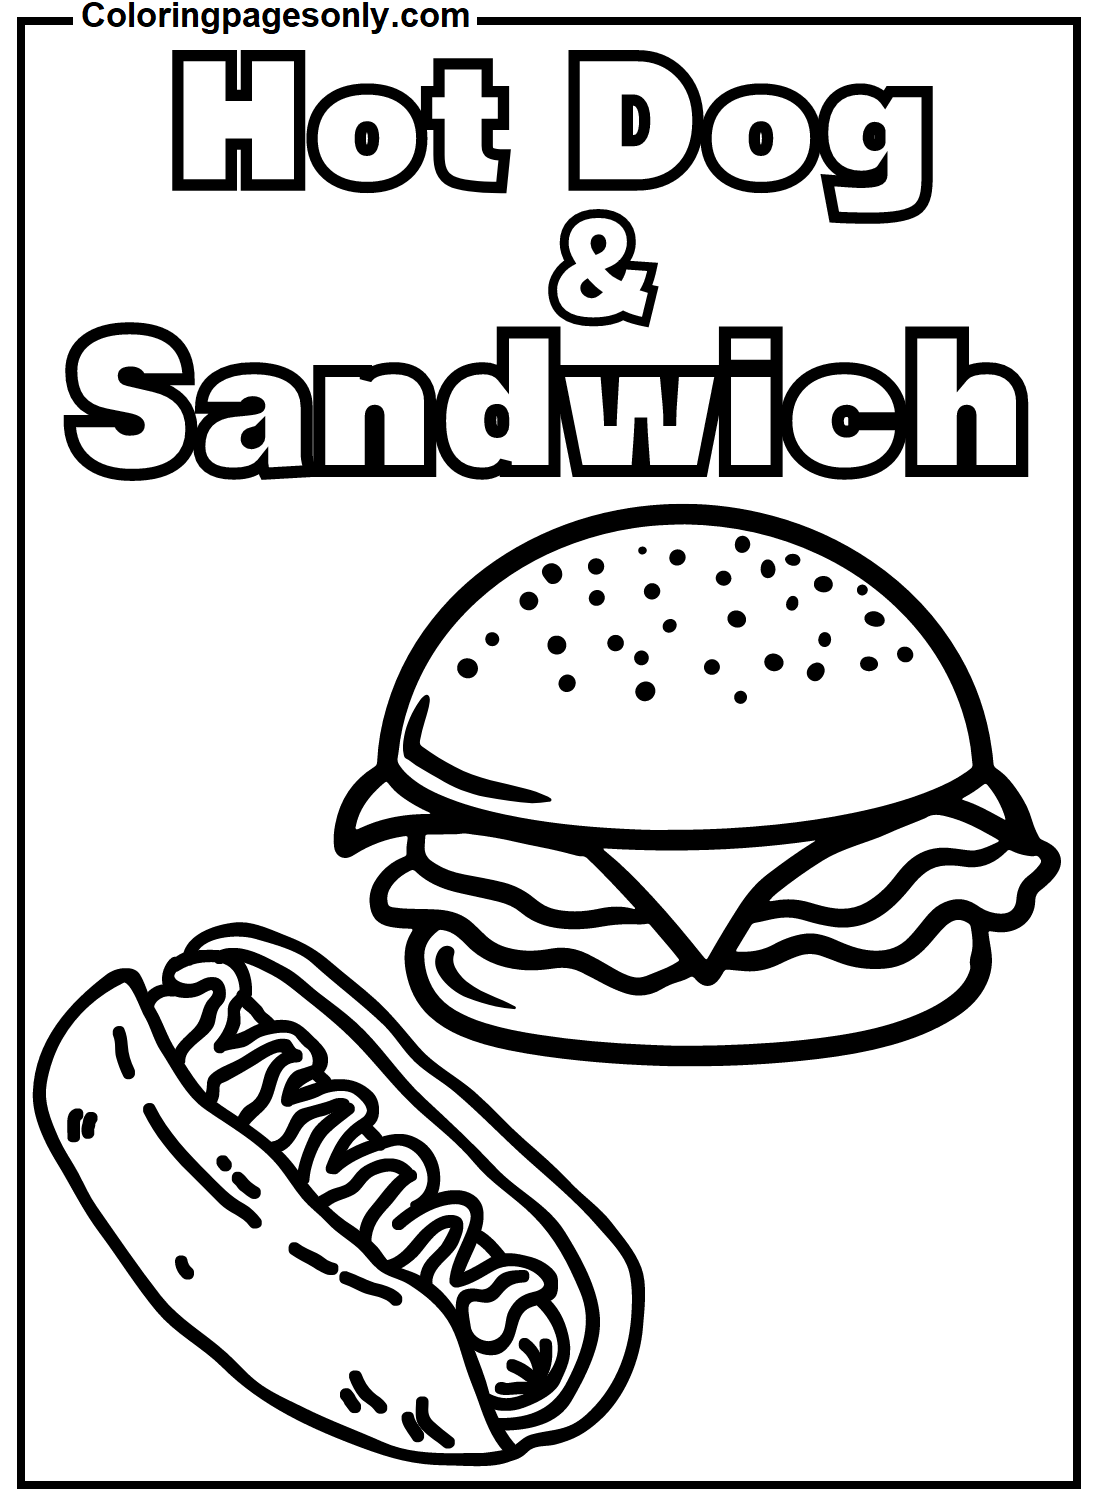 Hot Dog Sandwich Coloring Pages